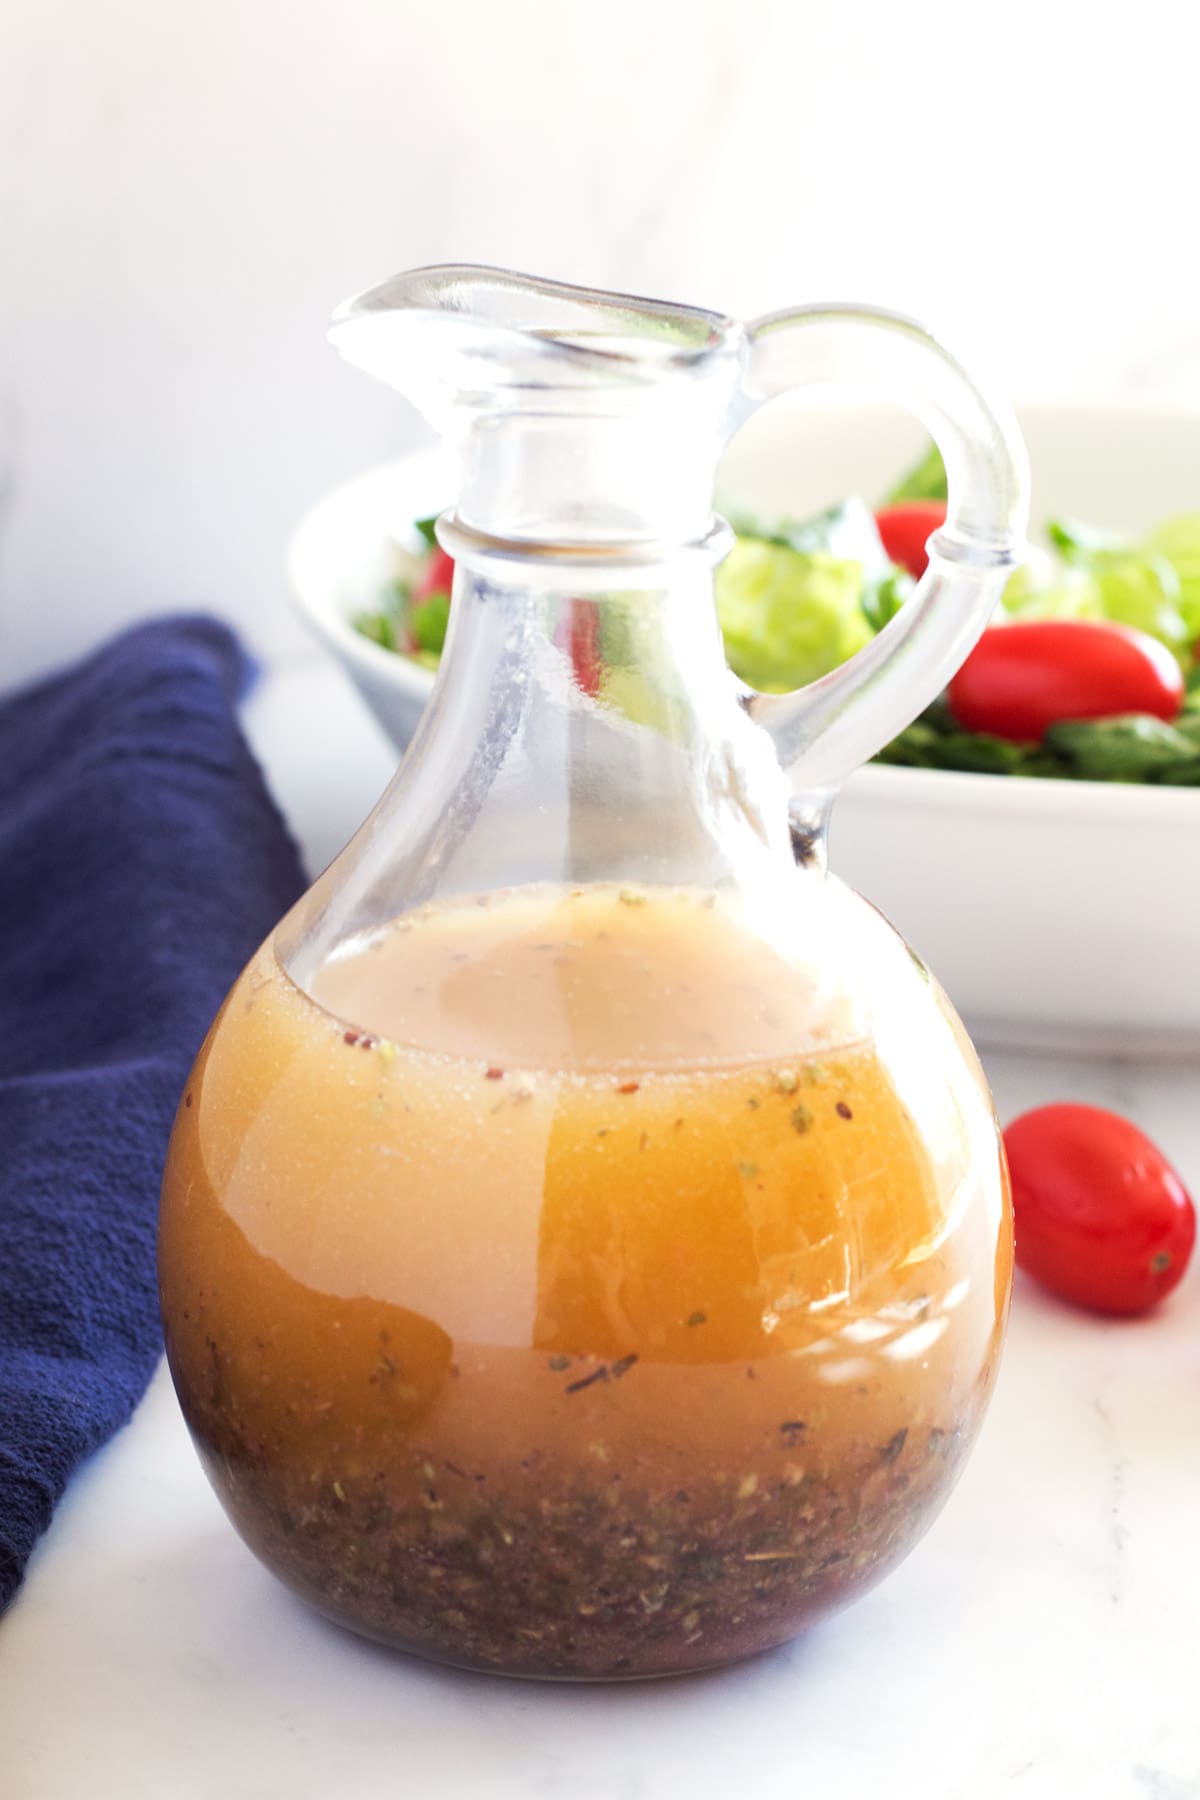 Straight view of a glass dressing bottle with Greek dressing inside and a bowl of salad in background.